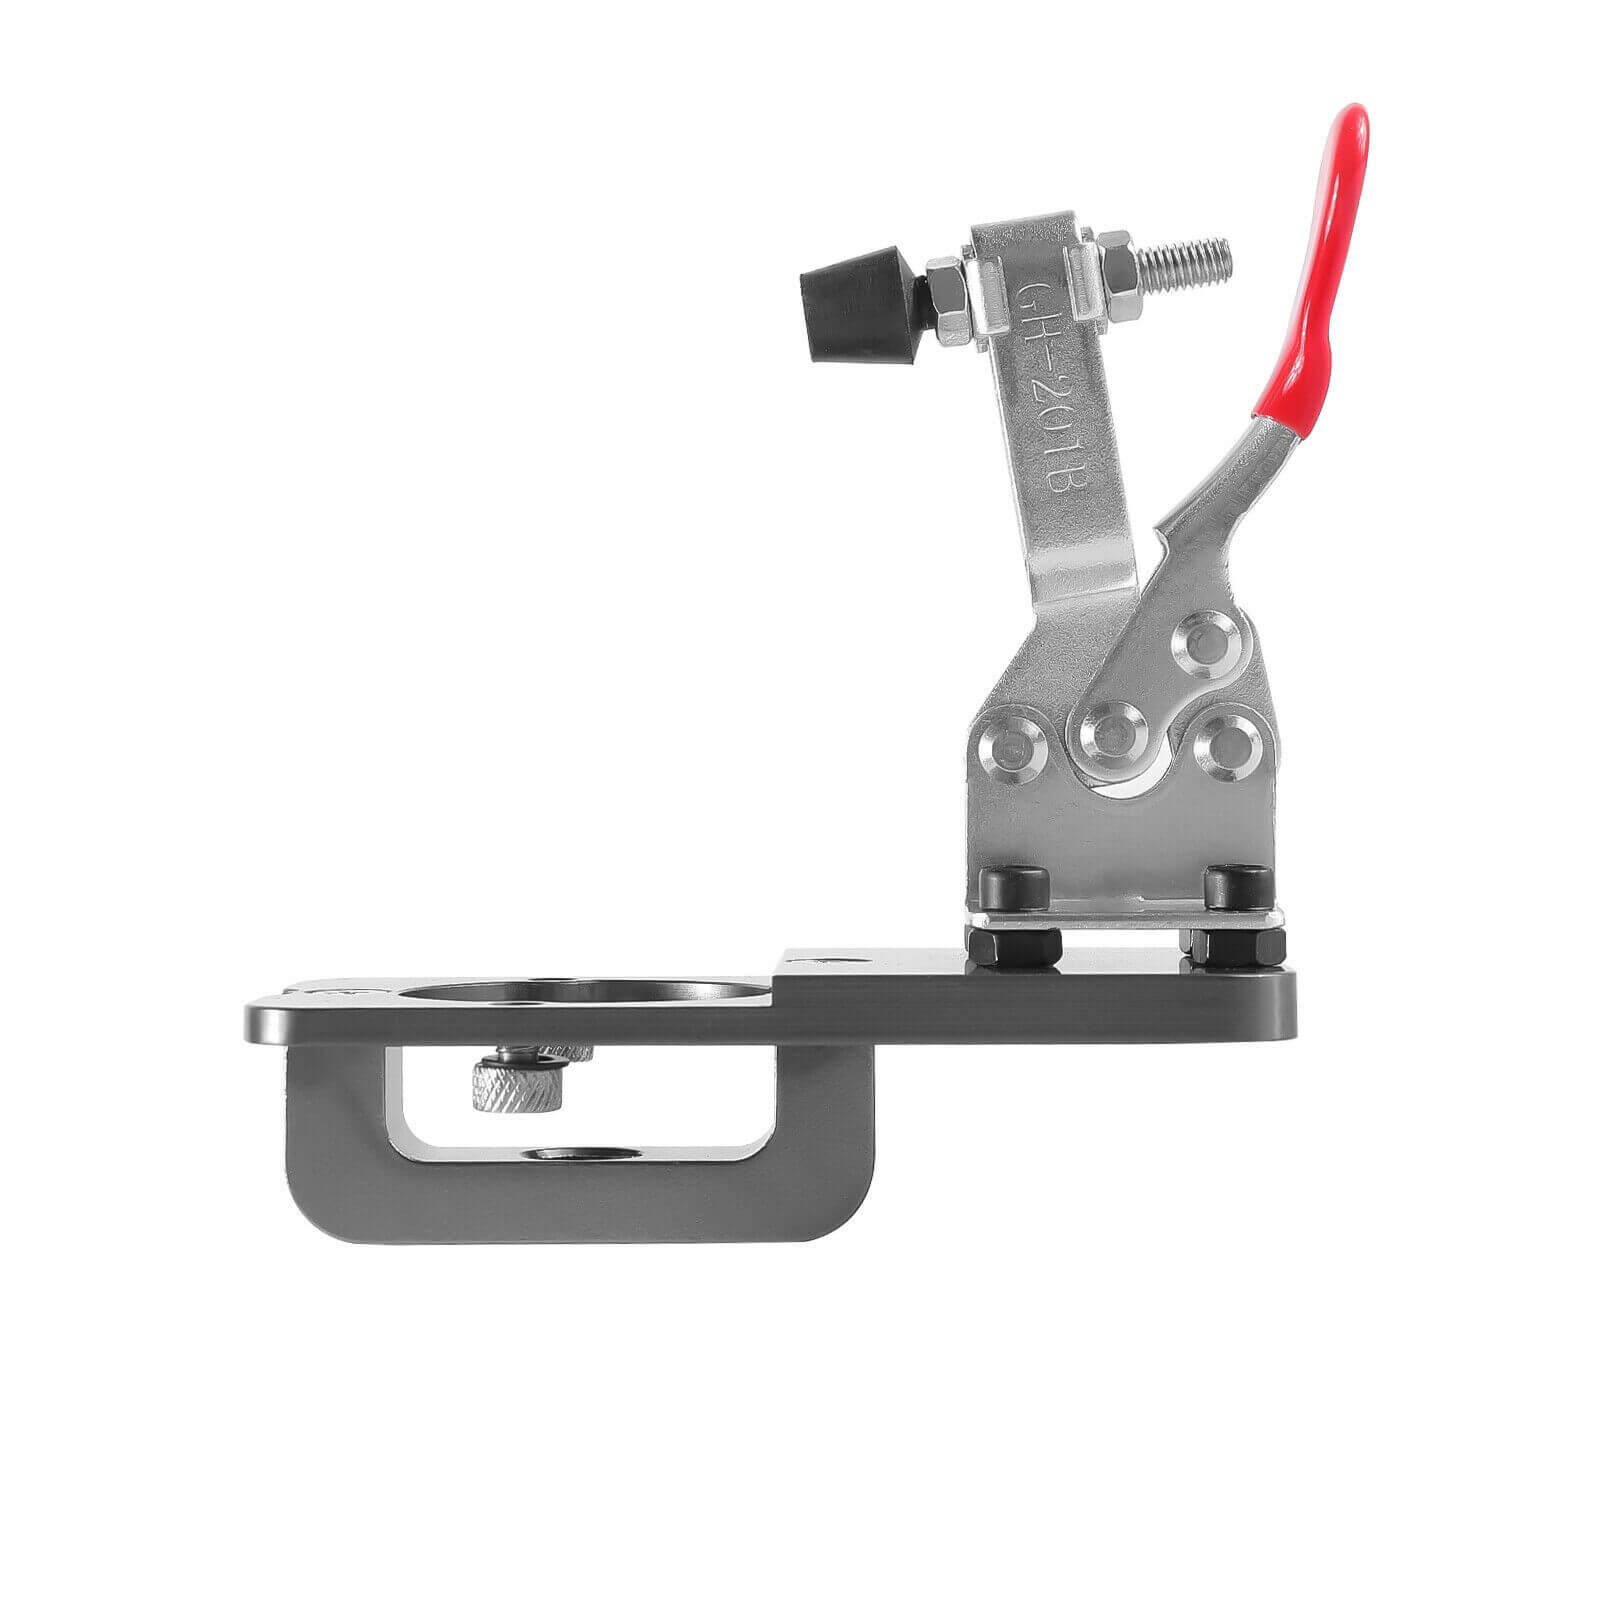 Showing of Durable 35mm Hinge Hole Jig Punch Locator Kit